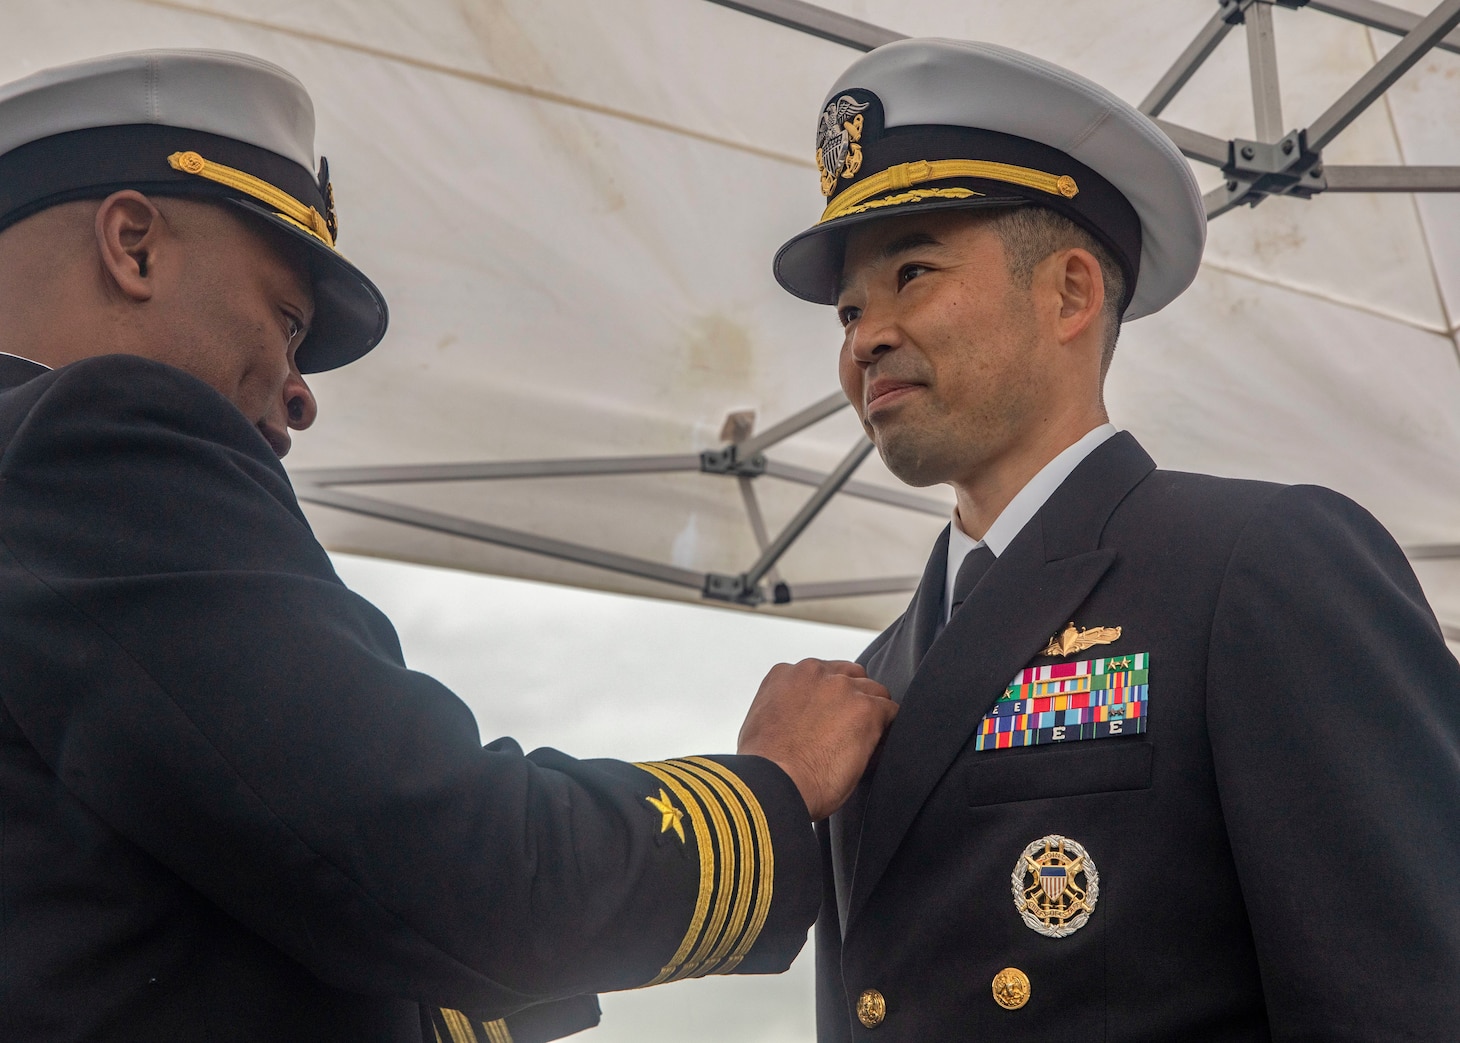 YOKOSUKA, Japan (Dec. 1, 2022) Cmdr. Kenji Igawa, incoming commanding officer of Arleigh Burke-class guided-missile destroyer USS Howard (DDG 83), receives his commanding officer’s pin from Capt. Walter Mainor, commander, Task Force 71, during a change of command ceremony aboard the ship, forward-deployed to Commander, Fleet Activities Yokosuka, Dec. 1. Howard is assigned to Commander, Task Force 71/Destroyer Squadron (DESRON) 15, the Navy’s largest forward-deployed DESRON and the U.S. 7th fleet’s principal surface force. (U.S. Navy photo by Mass Communication Specialist 2nd Class Samantha Oblander)